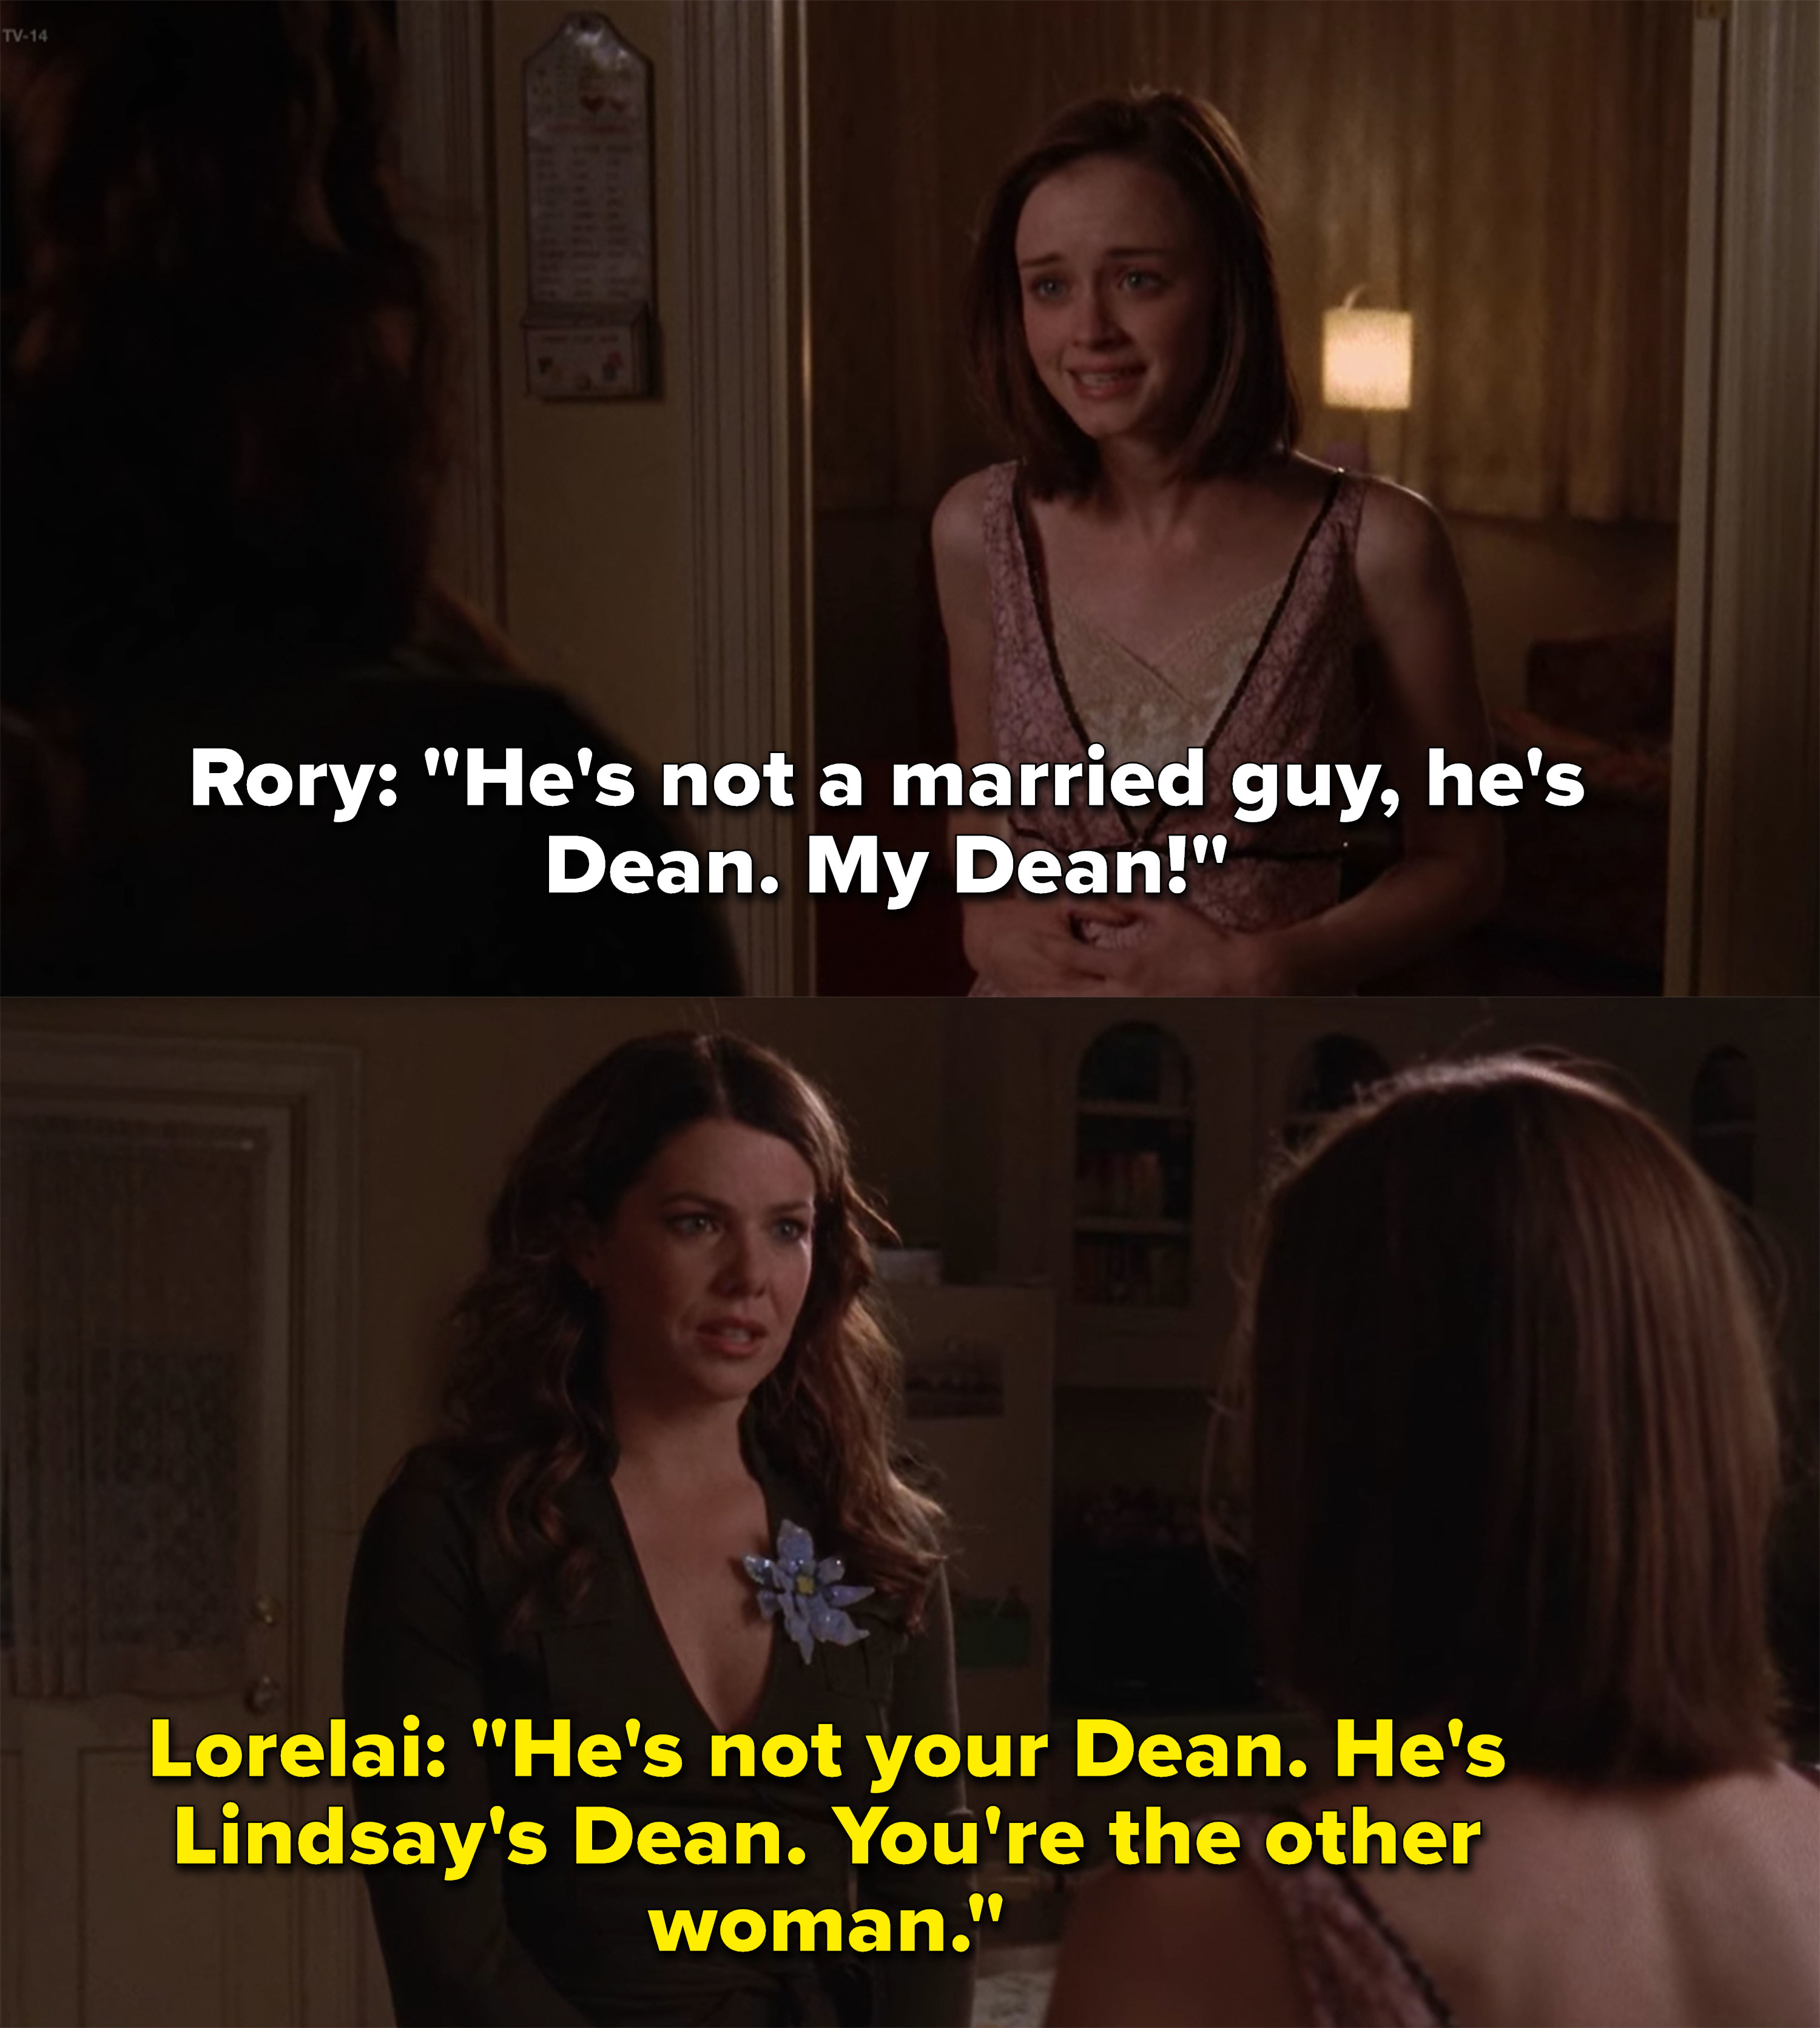 Lorelai to Rory: &quot;He&#x27;s not your Dean, he&#x27;s Lindsay&#x27;s Dean, you&#x27;re the other woman&quot;